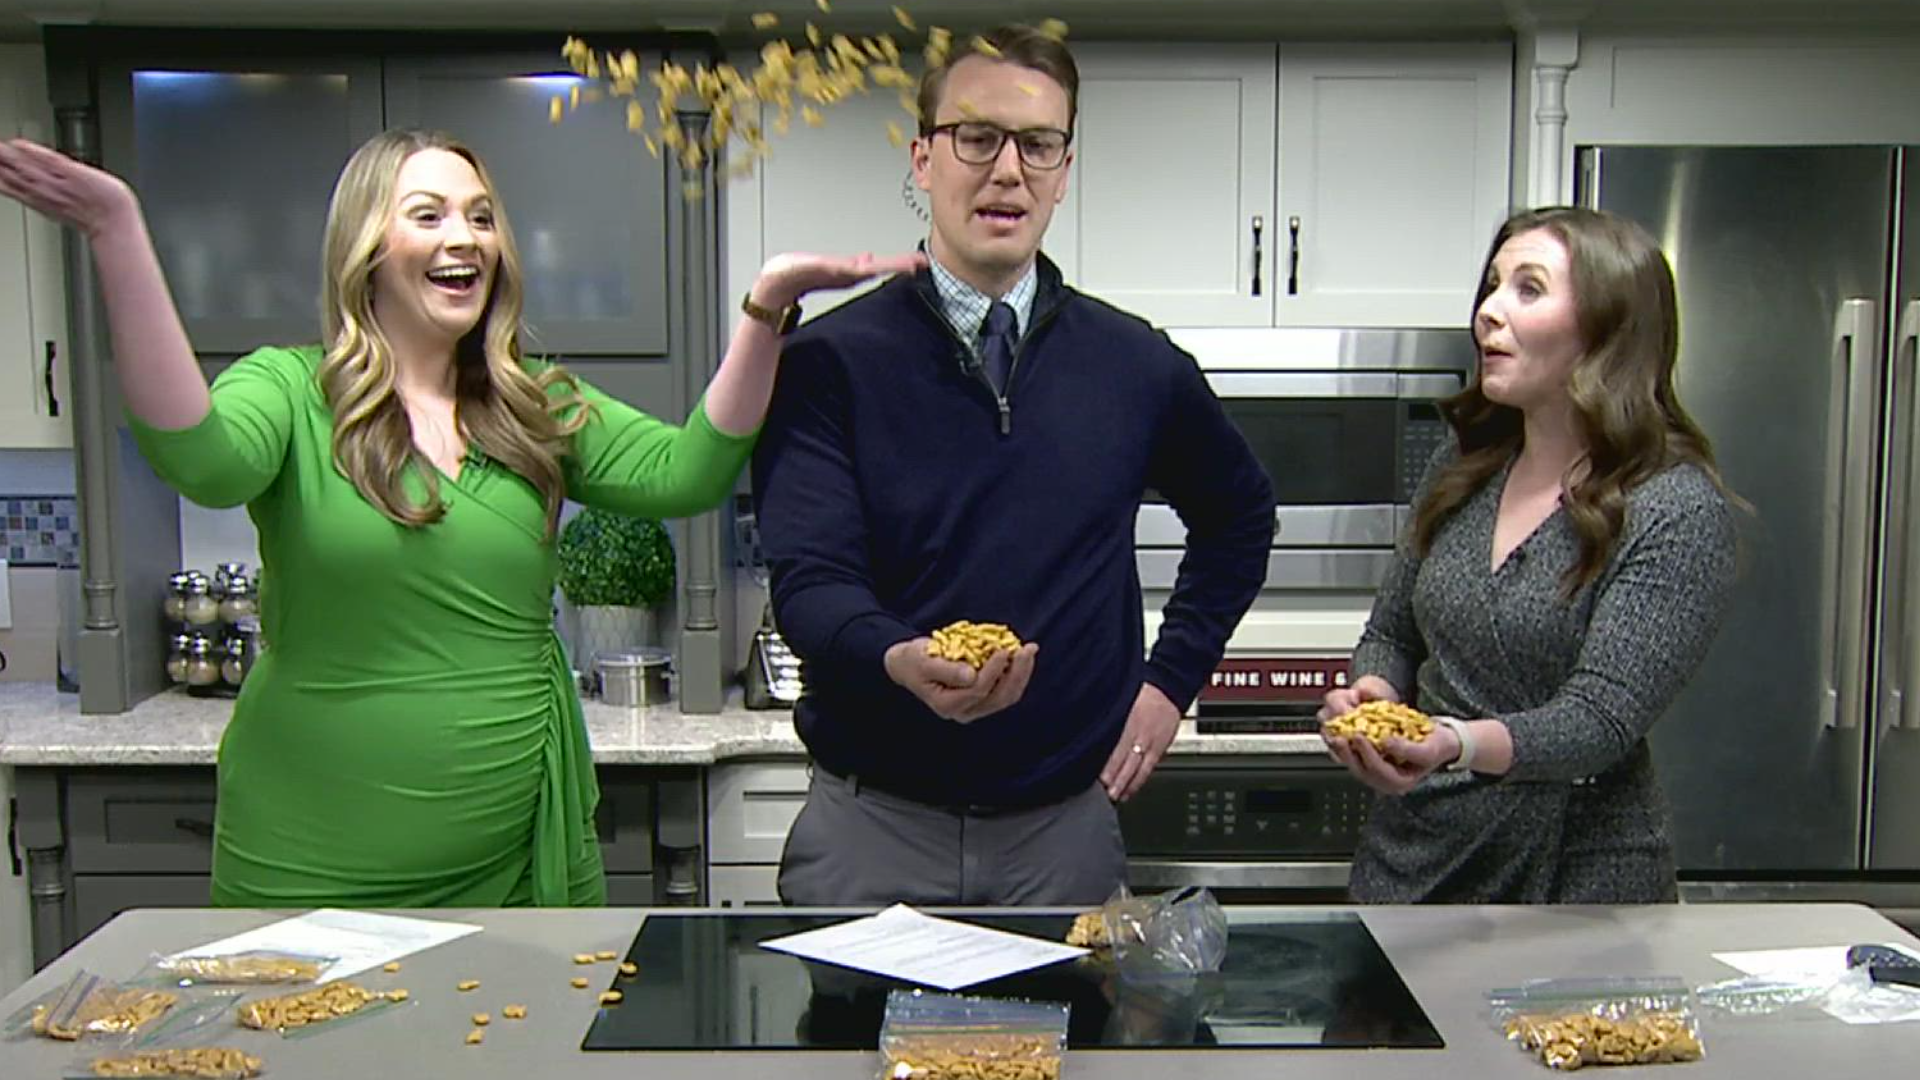 FOX43 Morning News anchors Jackie, Sean and Danielle see if they can beat NBA star Boban Marjanović's record of holding 301 goldfish in one hand.